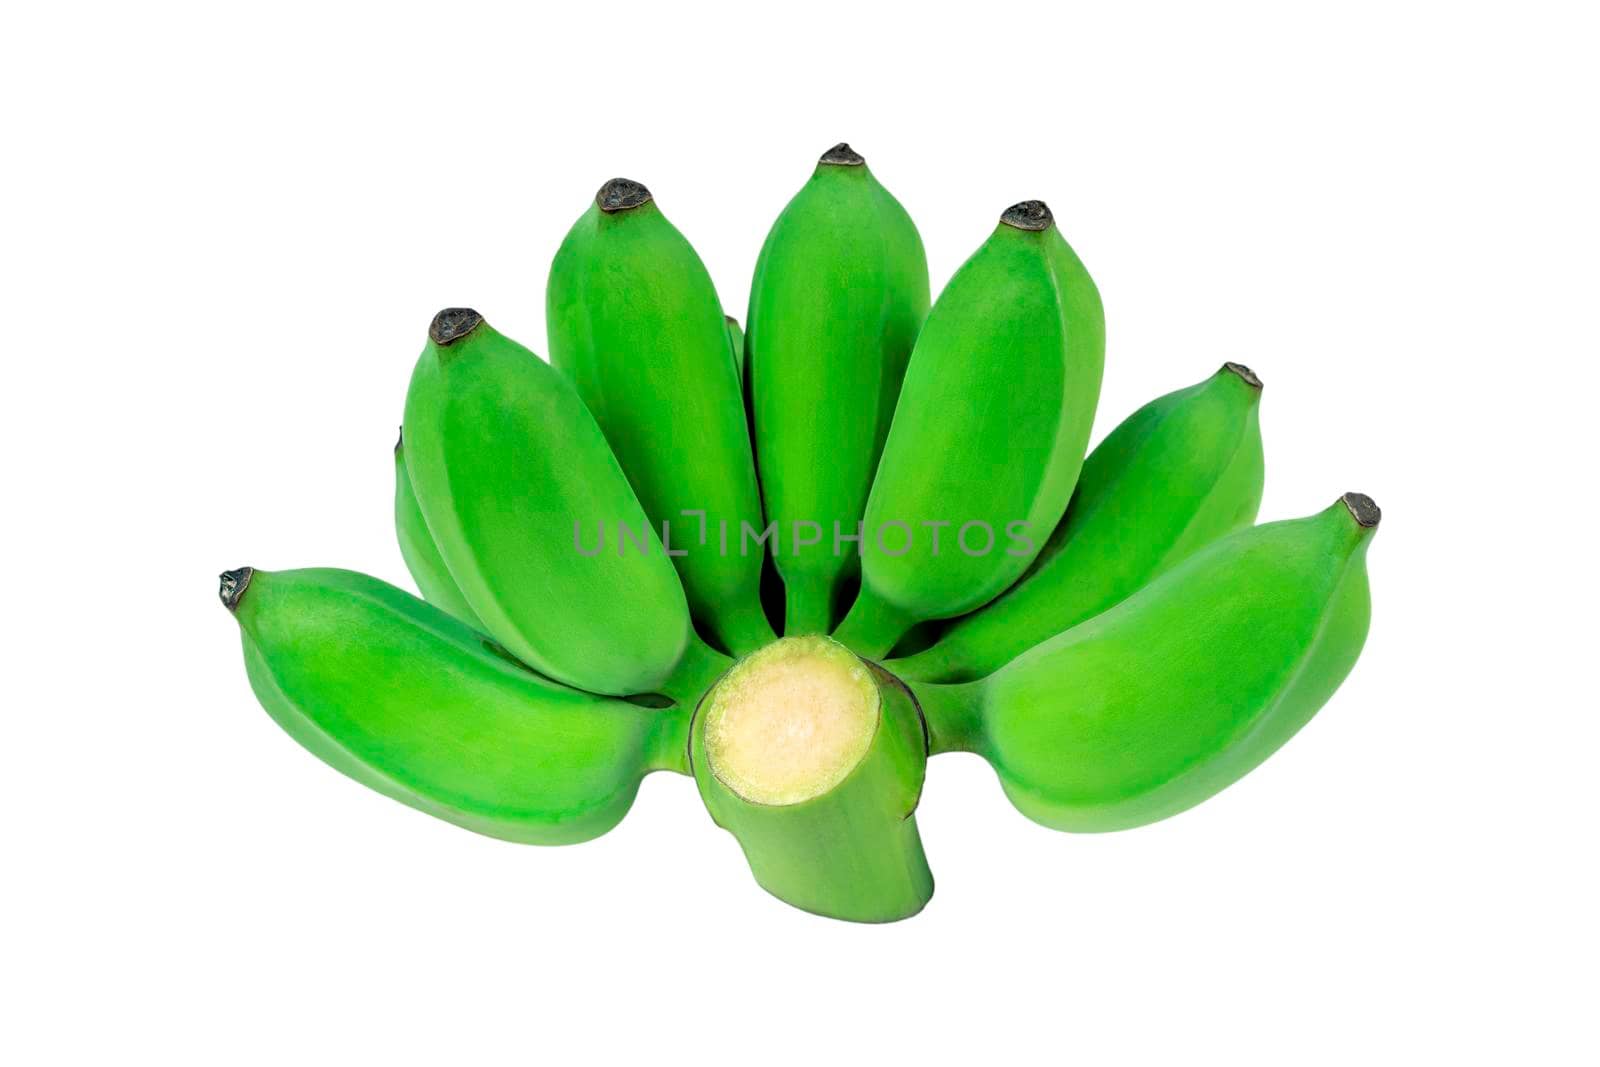 Group of green color raw bananas  isolated on white background. by wattanaphob